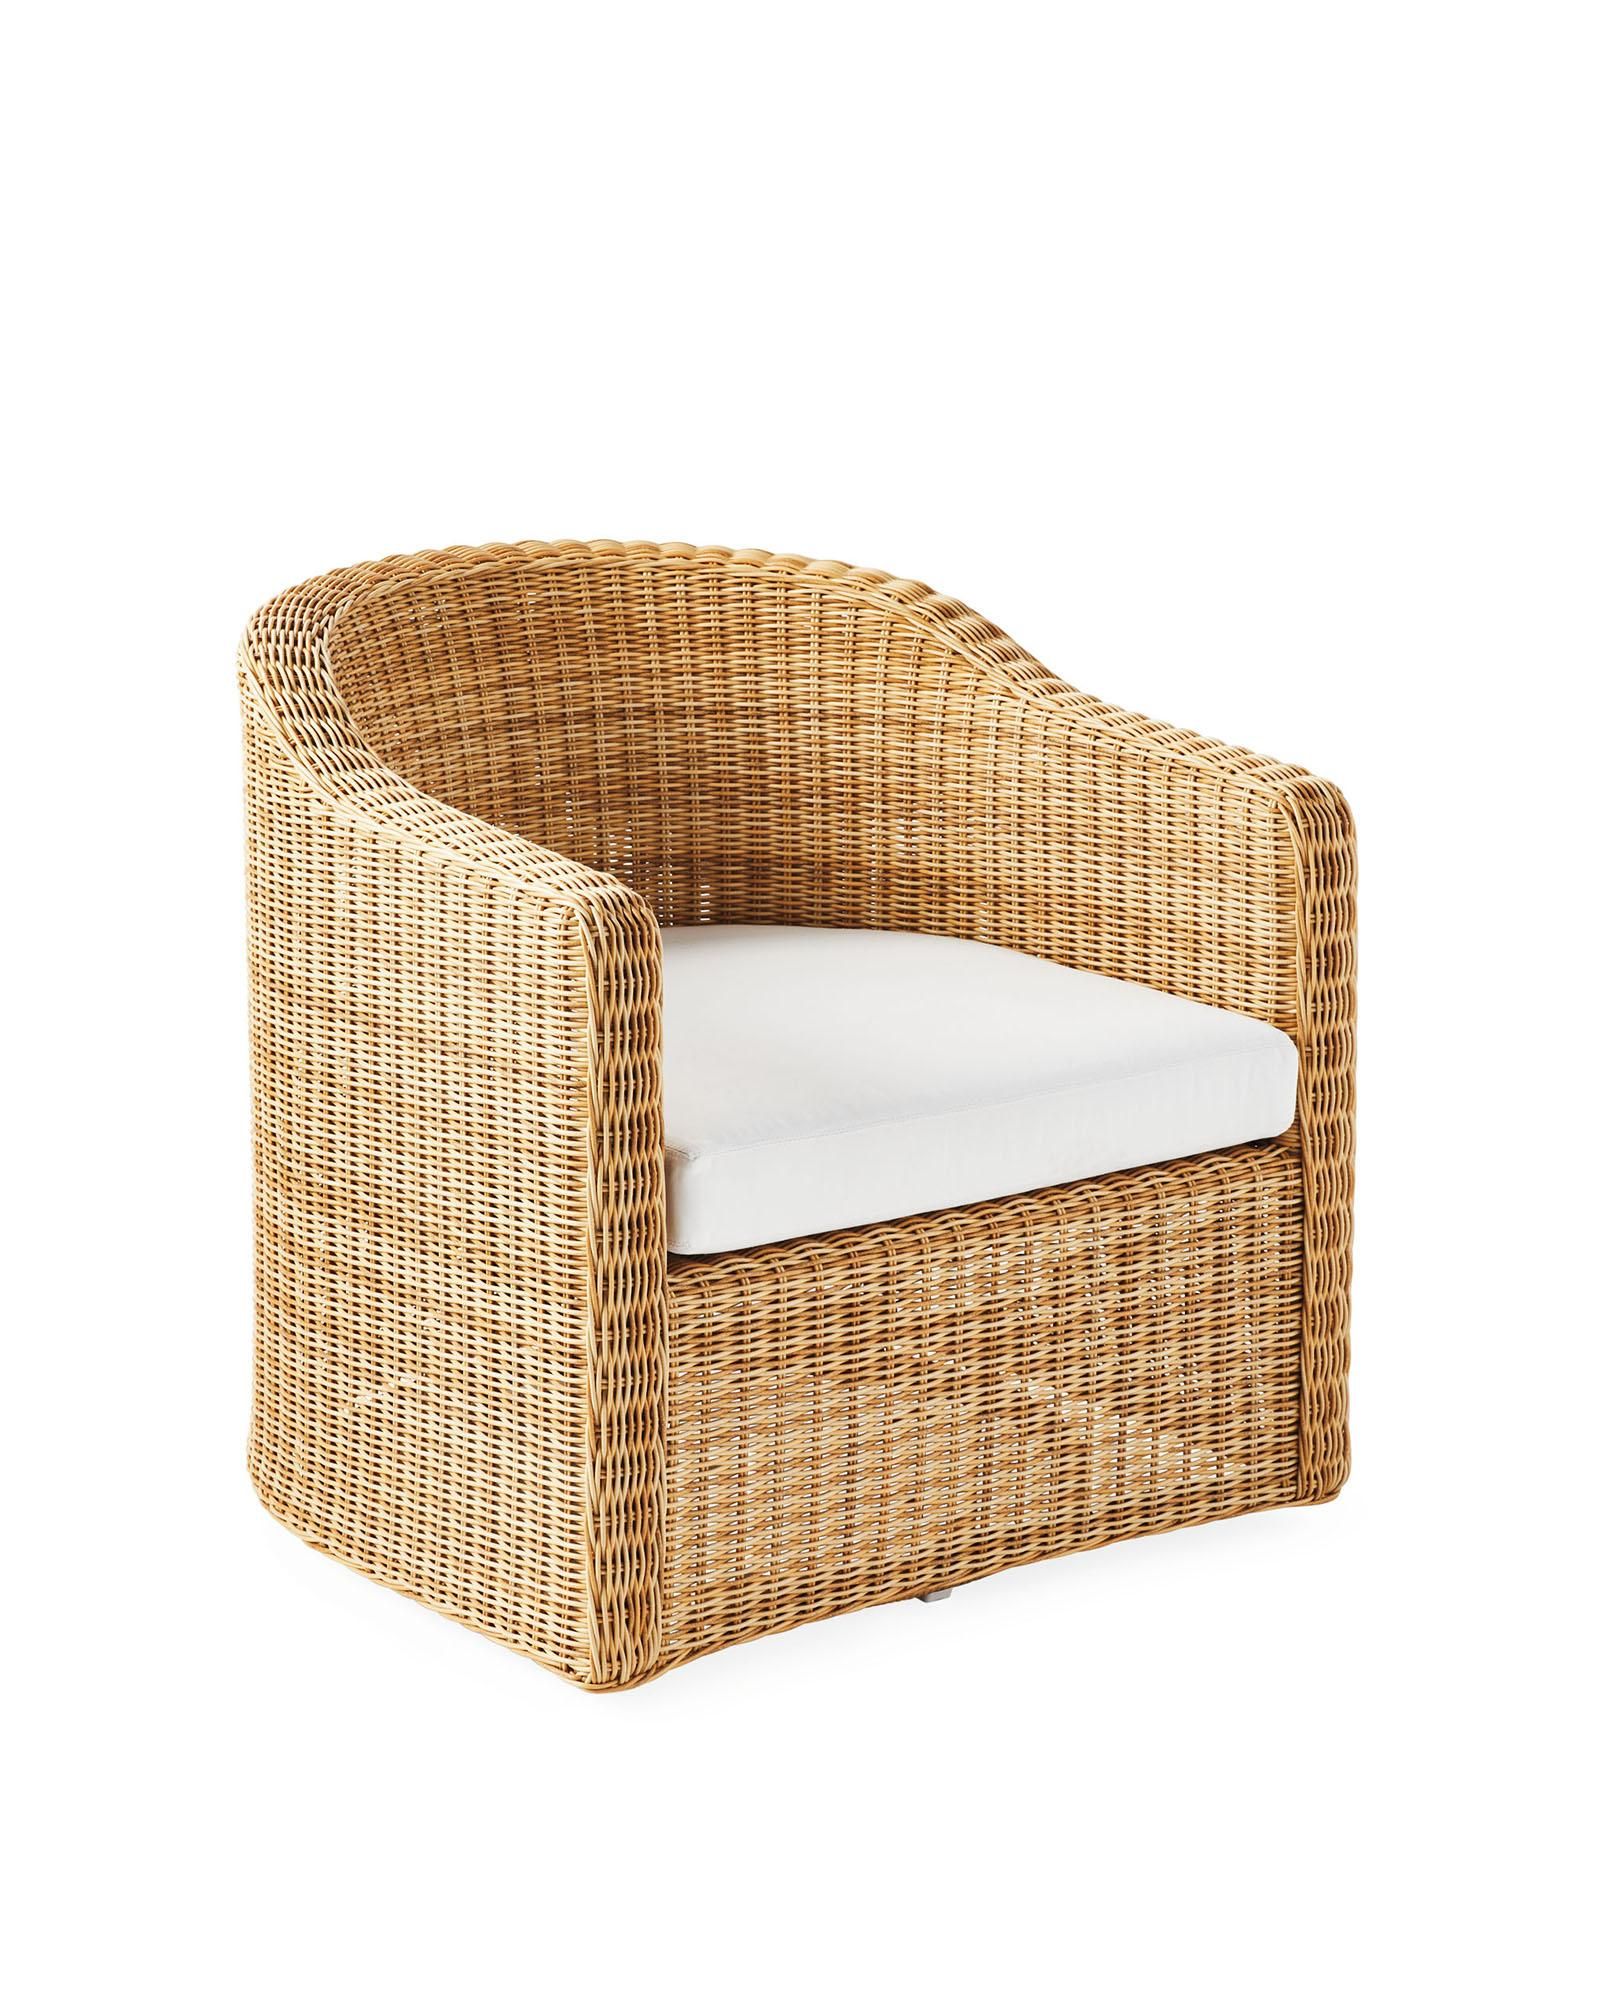 Tofino Swivel Chair - Light Dune | Serena and Lily